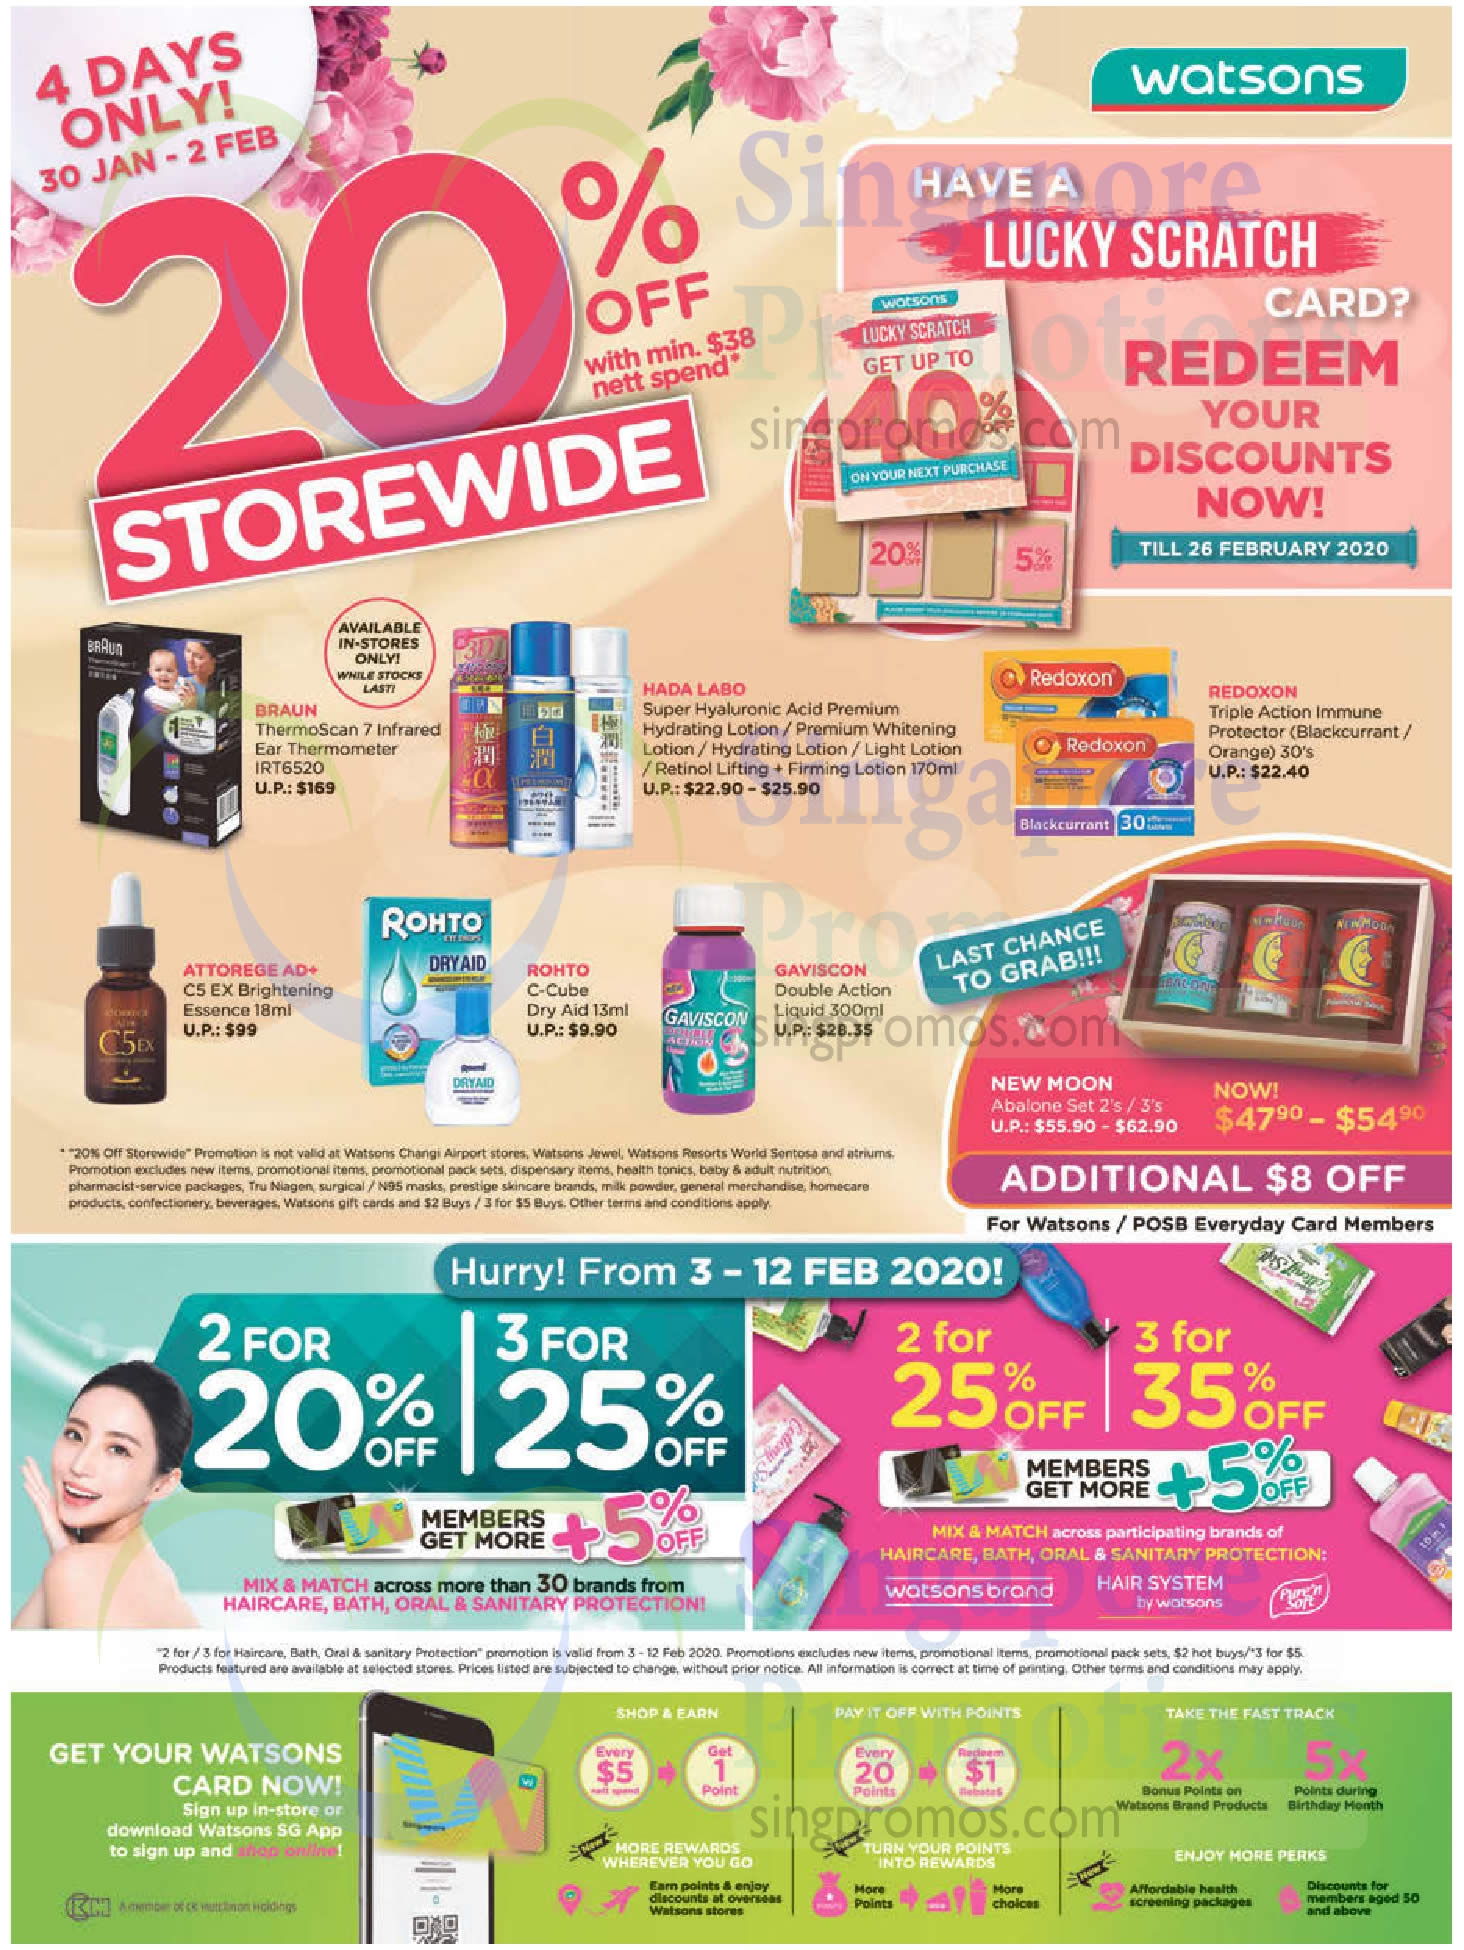 Watsons: Everyone’s invited! Storewide 20% off with min $38 spend till